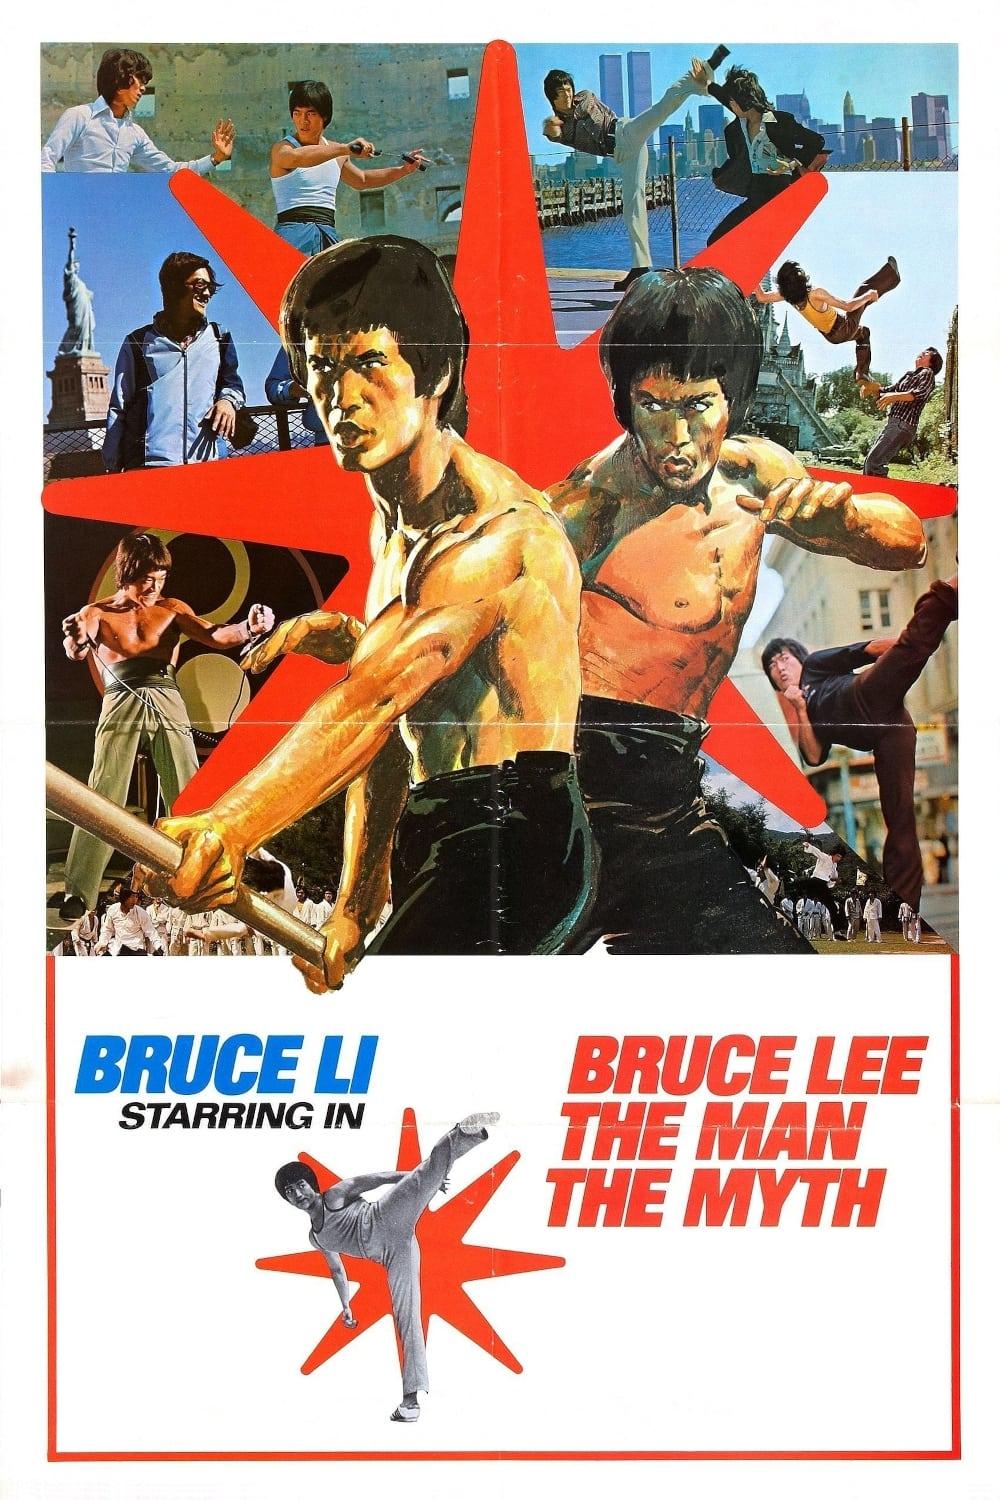 Bruce Lee: The Man, The Myth poster